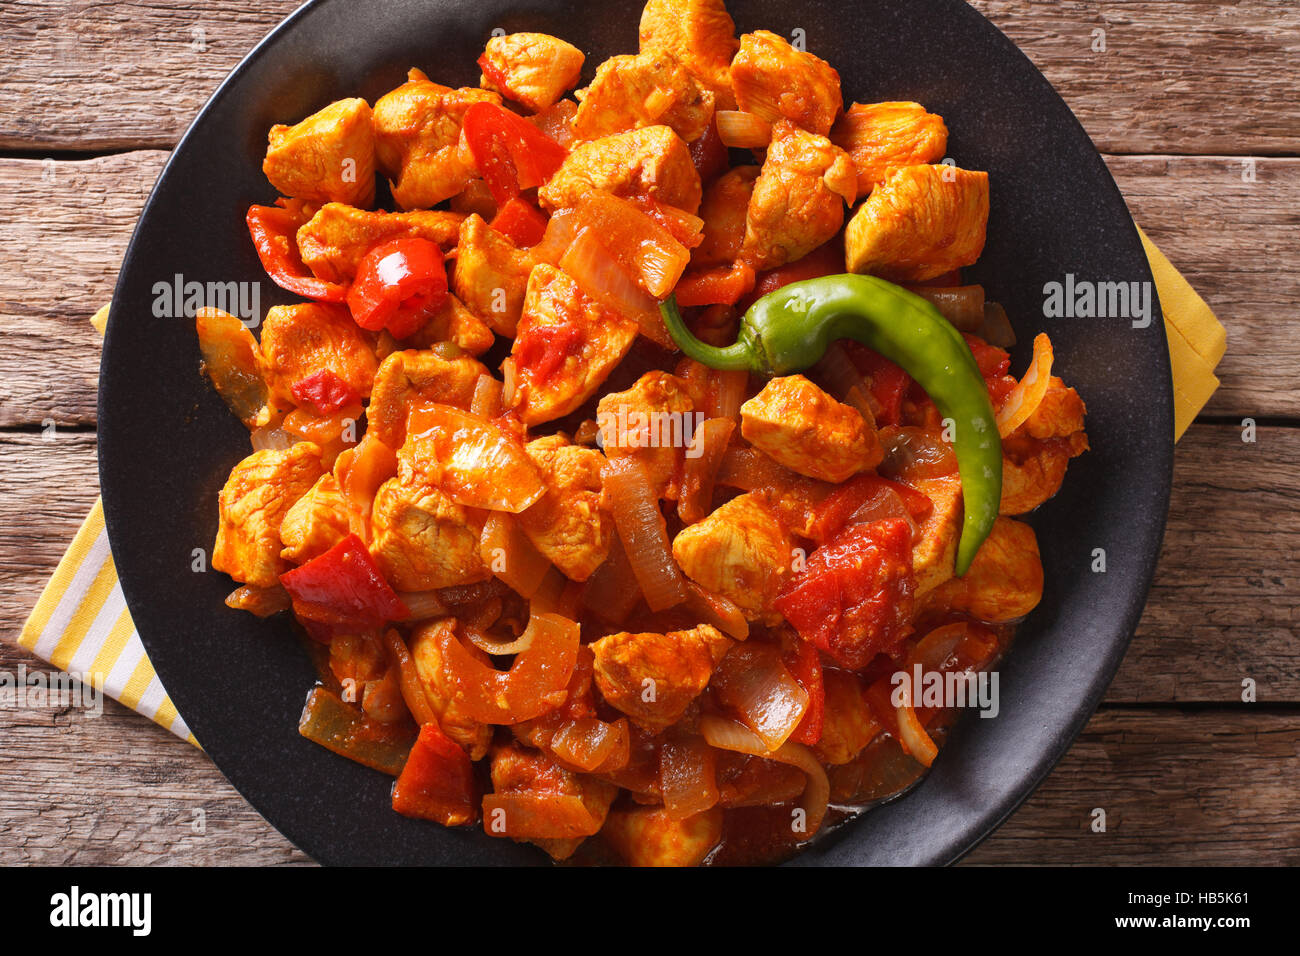 https://c8.alamy.com/comp/HB5K61/spicy-chicken-jalfrezi-with-pepper-and-onion-close-up-on-a-plate-horizontal-HB5K61.jpg